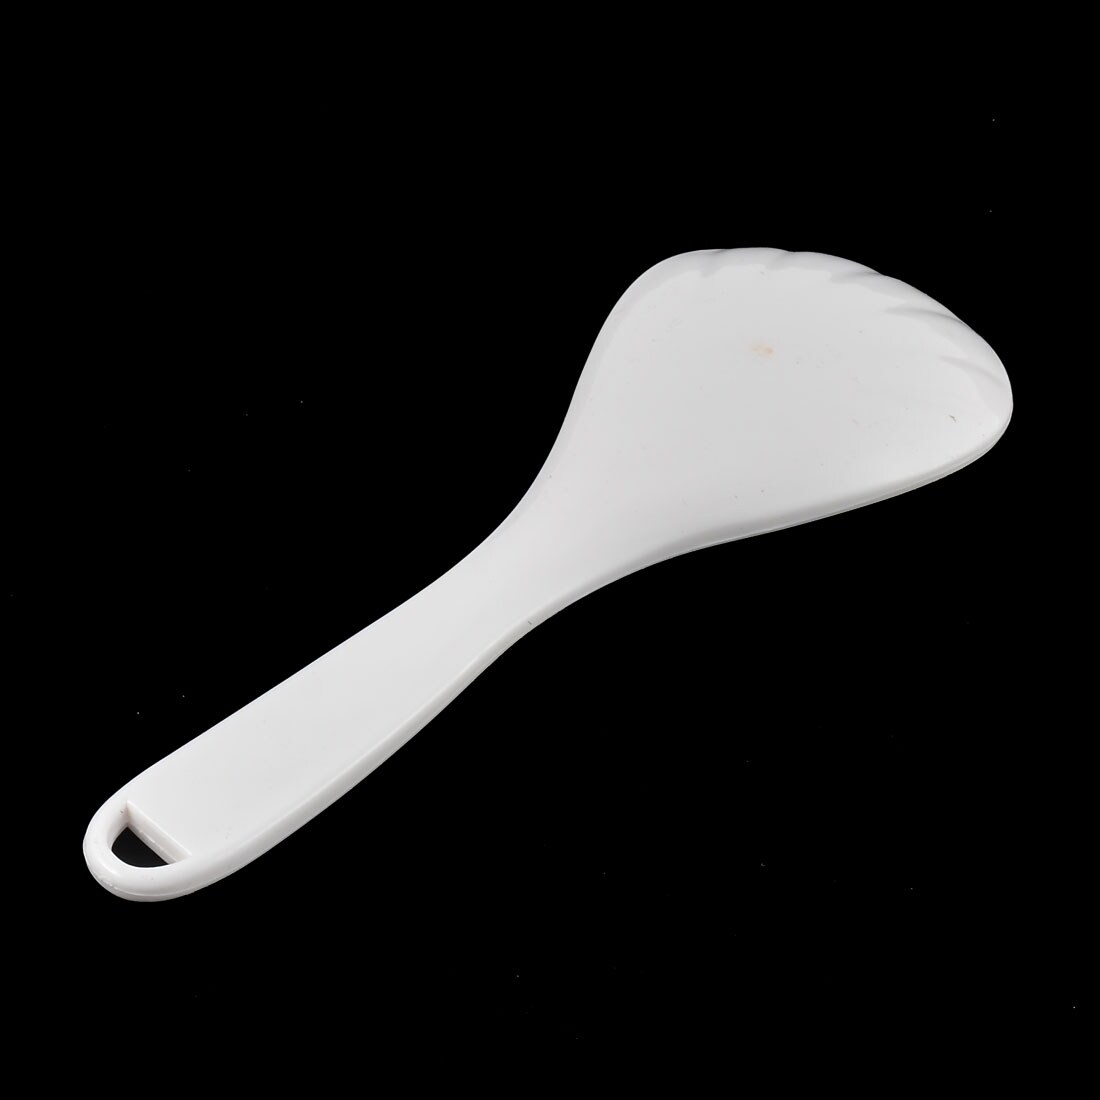 https://ak1.ostkcdn.com/images/products/is/images/direct/d2d3144bc1803ba9ca8496ae6a54c689f1b9d46b/Plastic-Curved-Grip-Paddle-Dinner-Rice-Meal-Spoon-Kitchenware-Tool.jpg